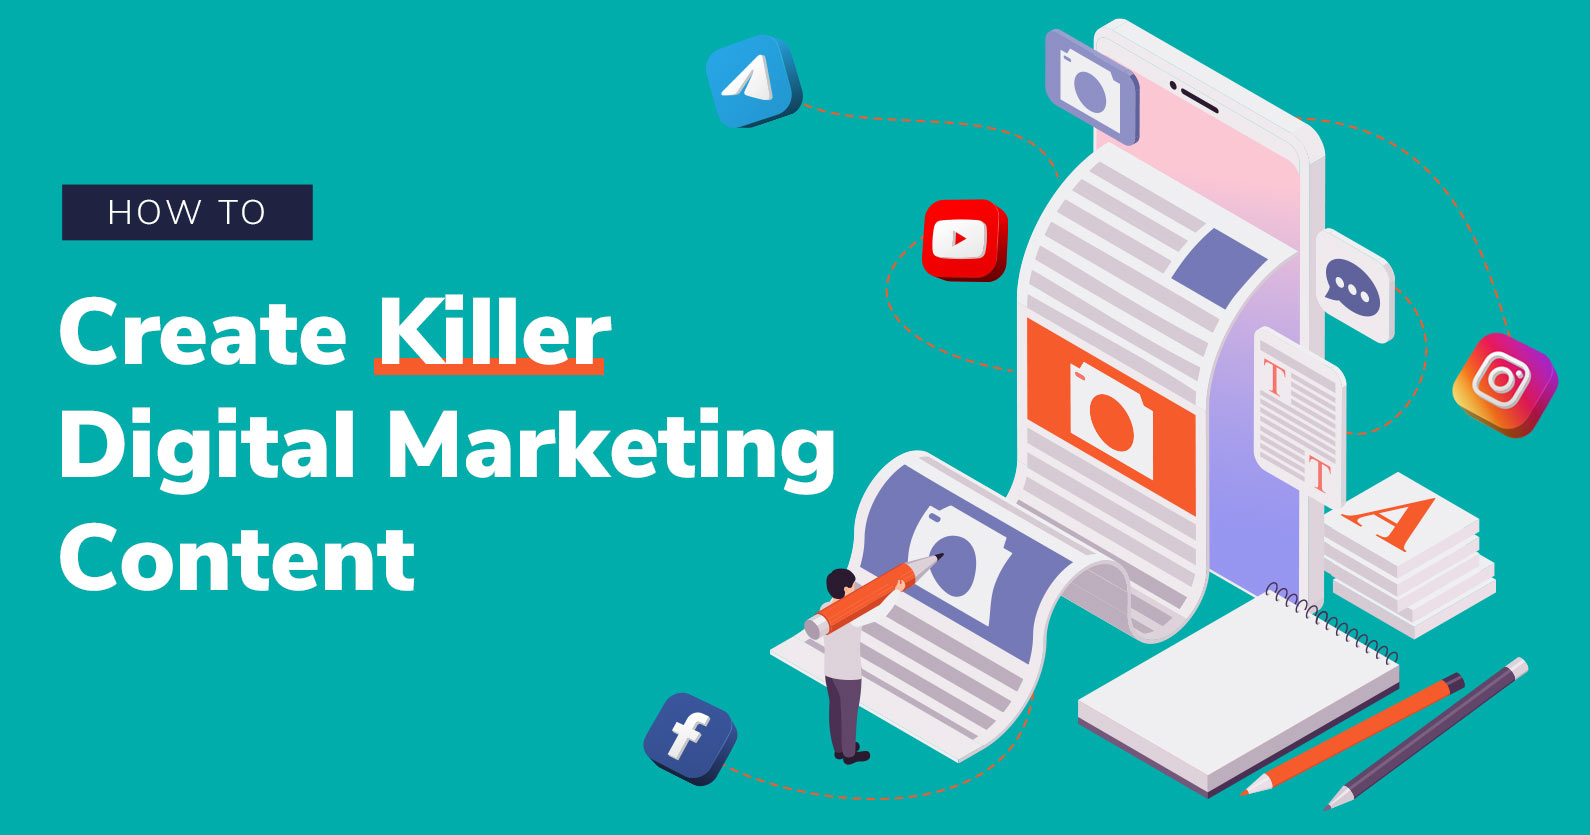 How To Create Killer Digital Marketing Content